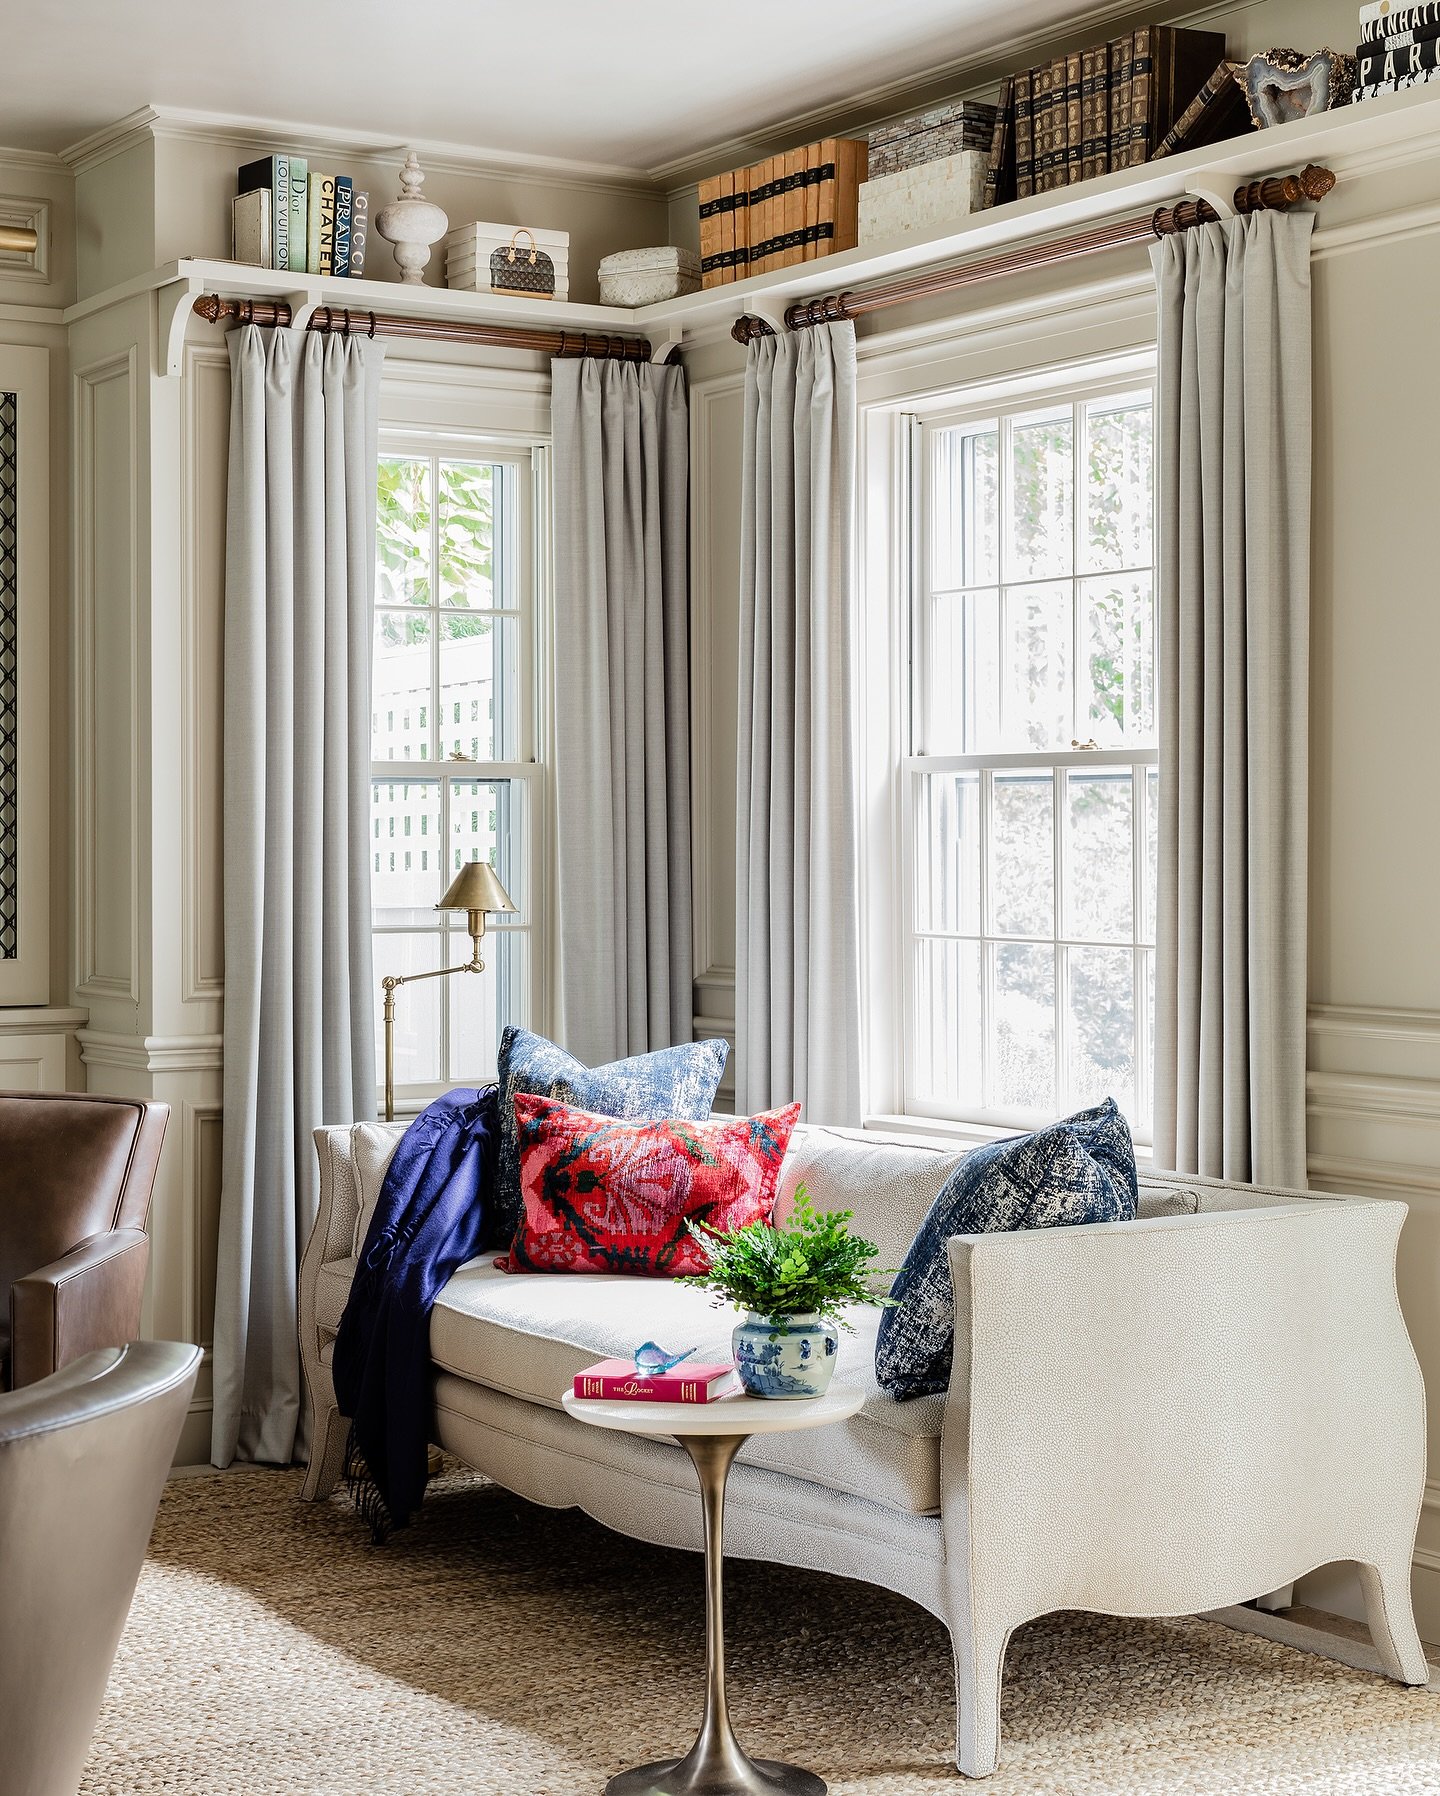 &ldquo;A house that has a library in it has a soul.&rdquo; ‒ Plato⁣
⁣
⁣
Interior design: @robingannoninteriors⁣
Photography: @michaeljleephotography